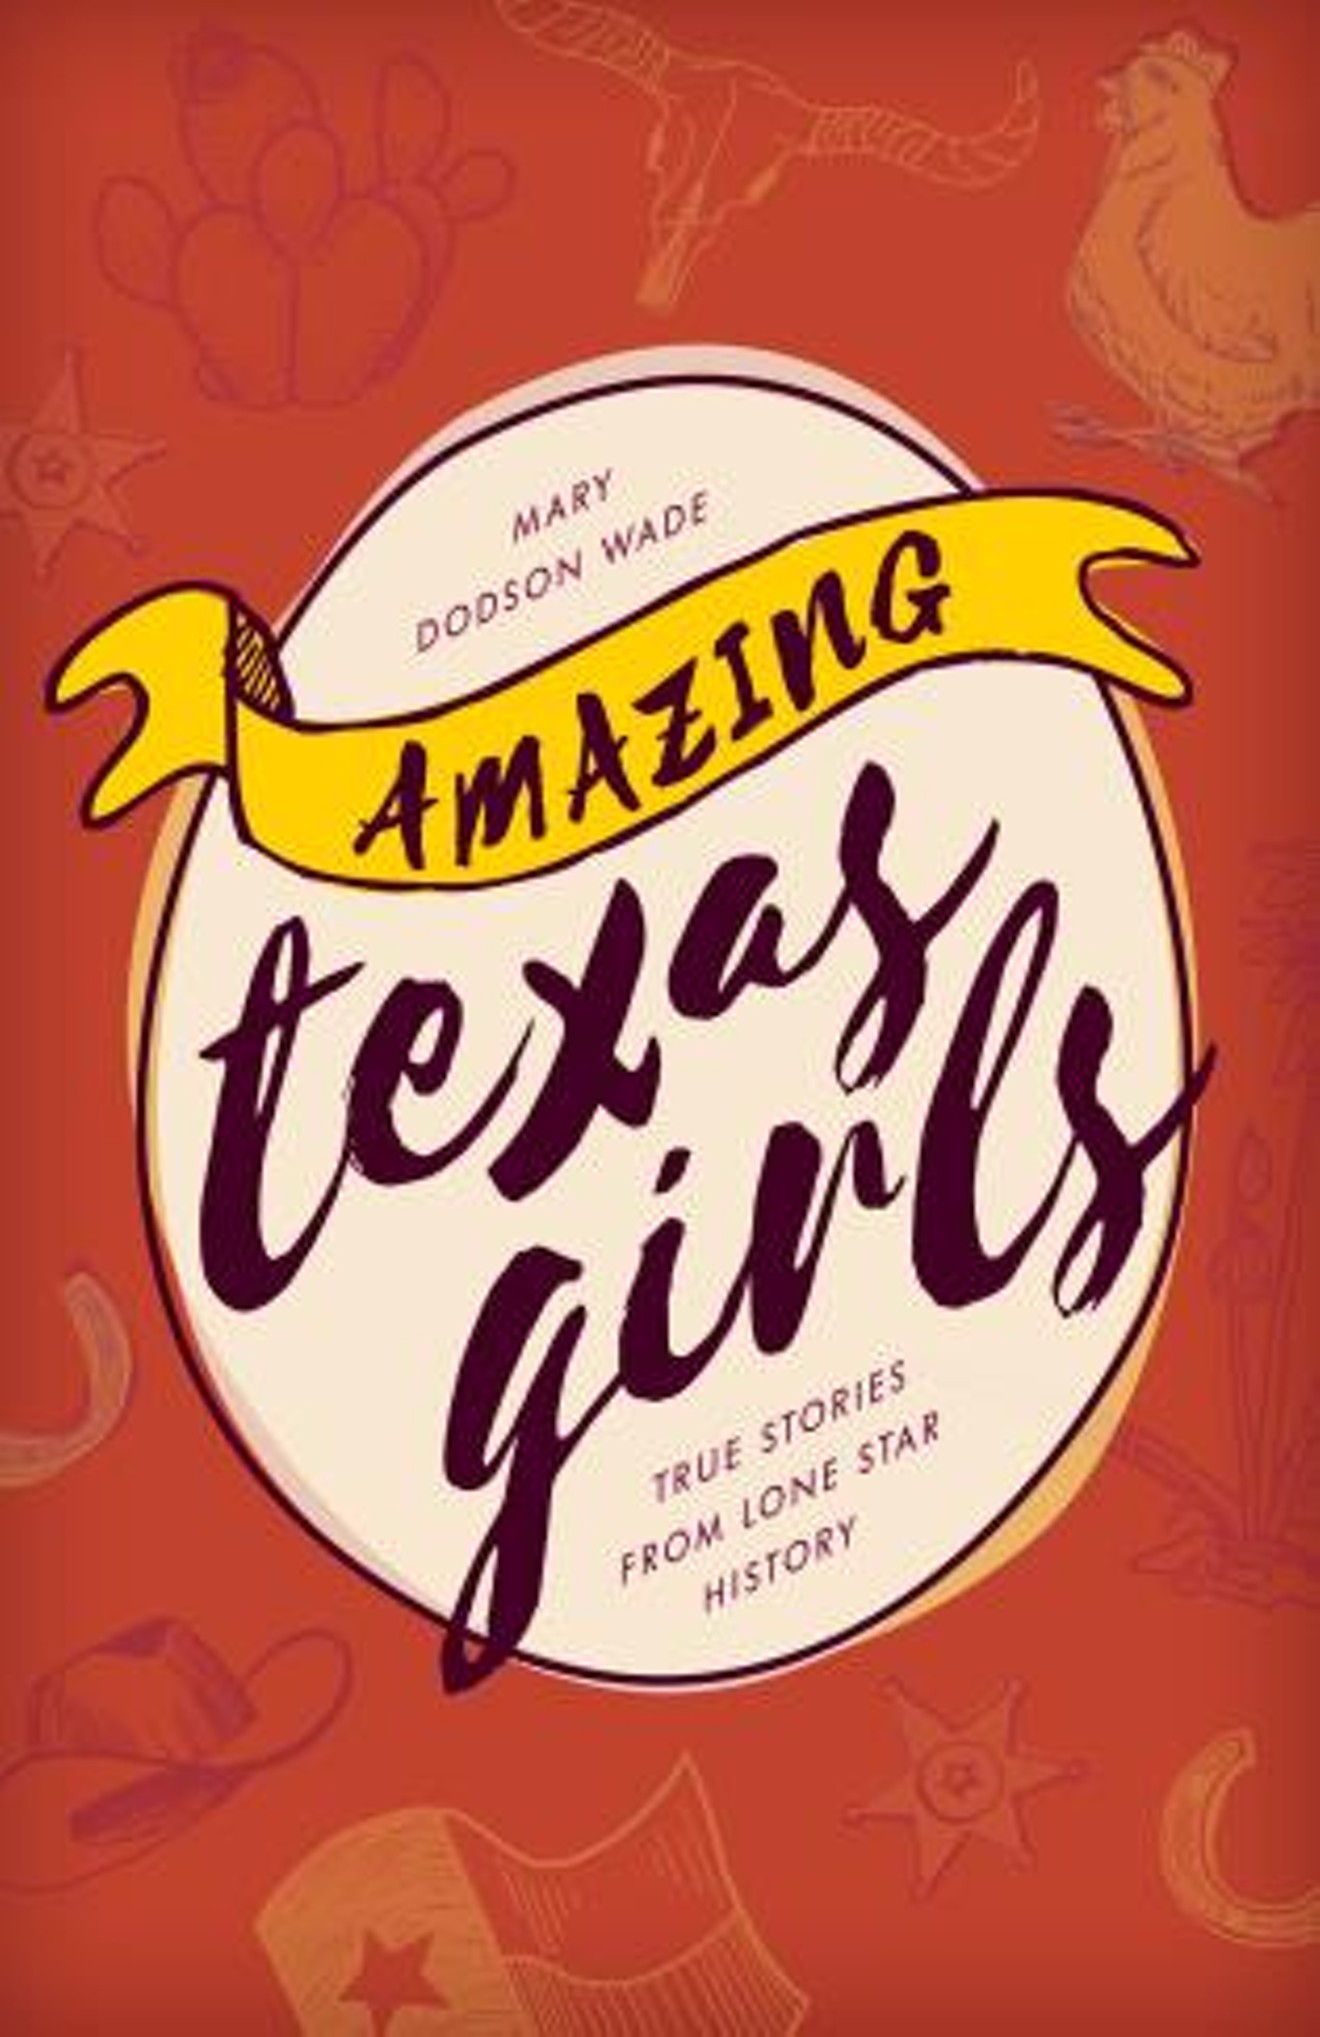 Girls with gumption fill Mary Dodson Wade's latest book.